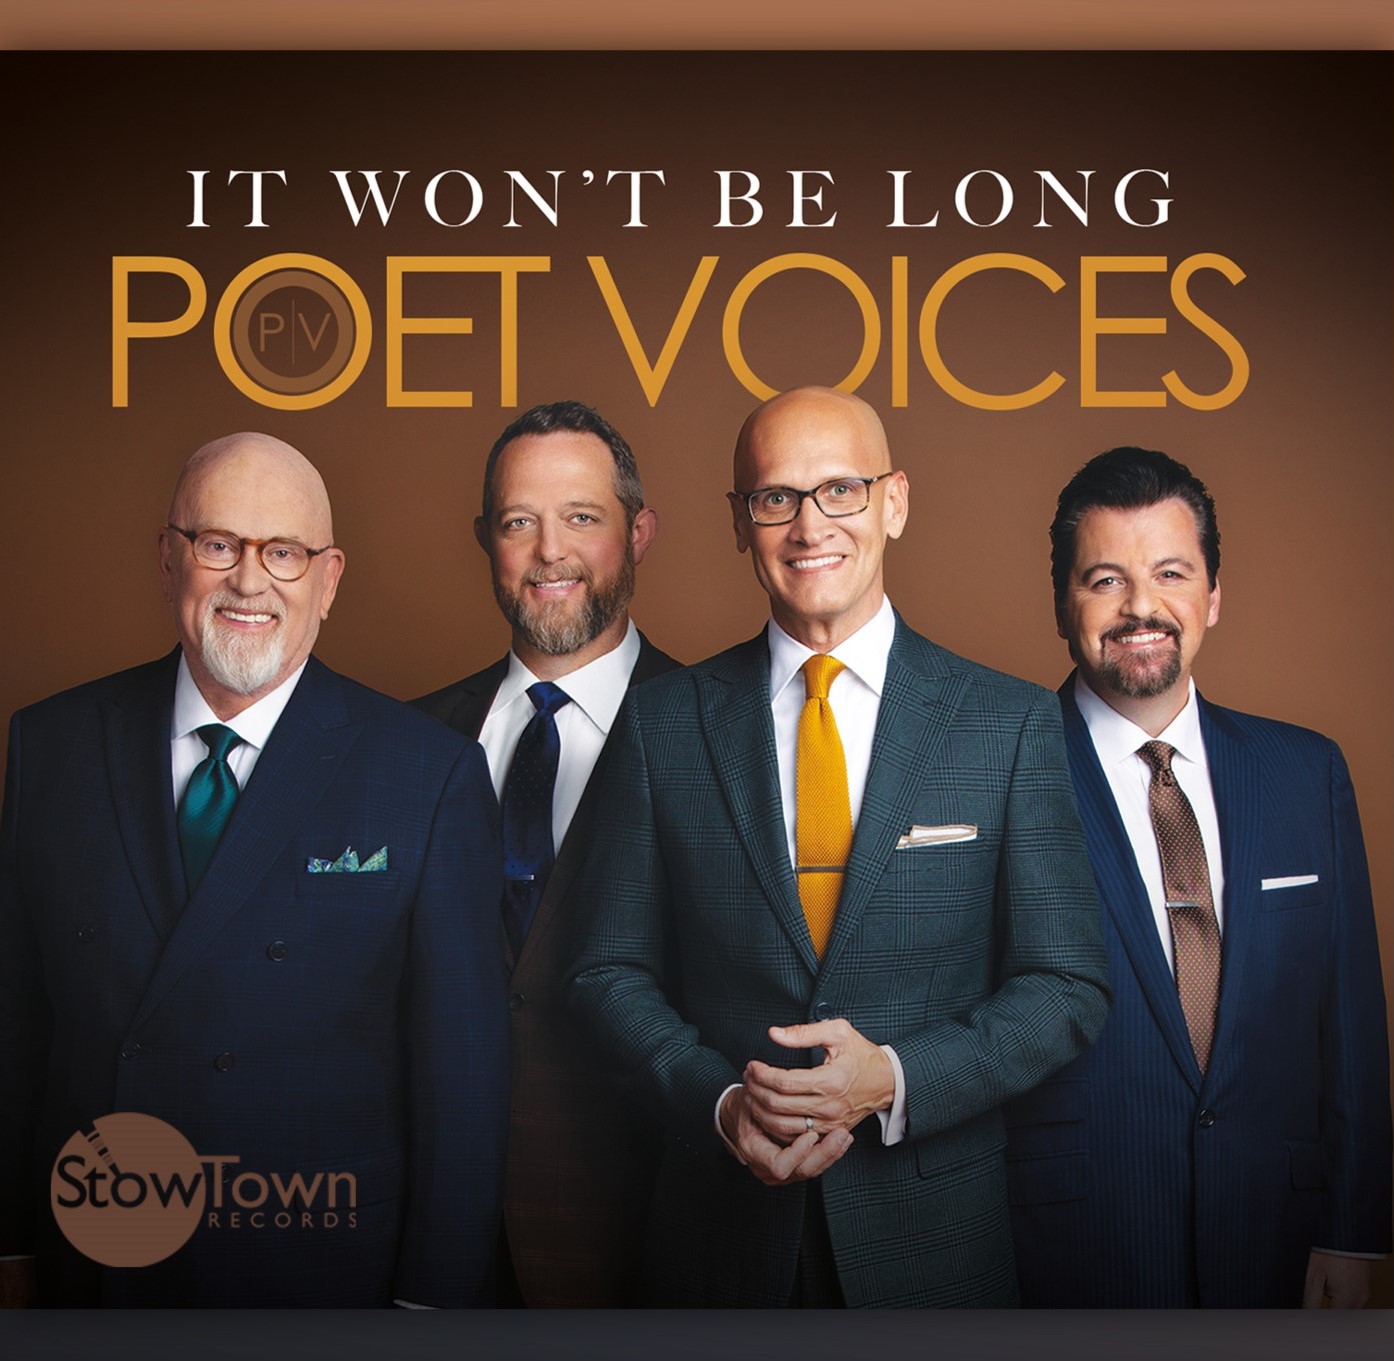 Art for It Won't Be Long by Poet Voices